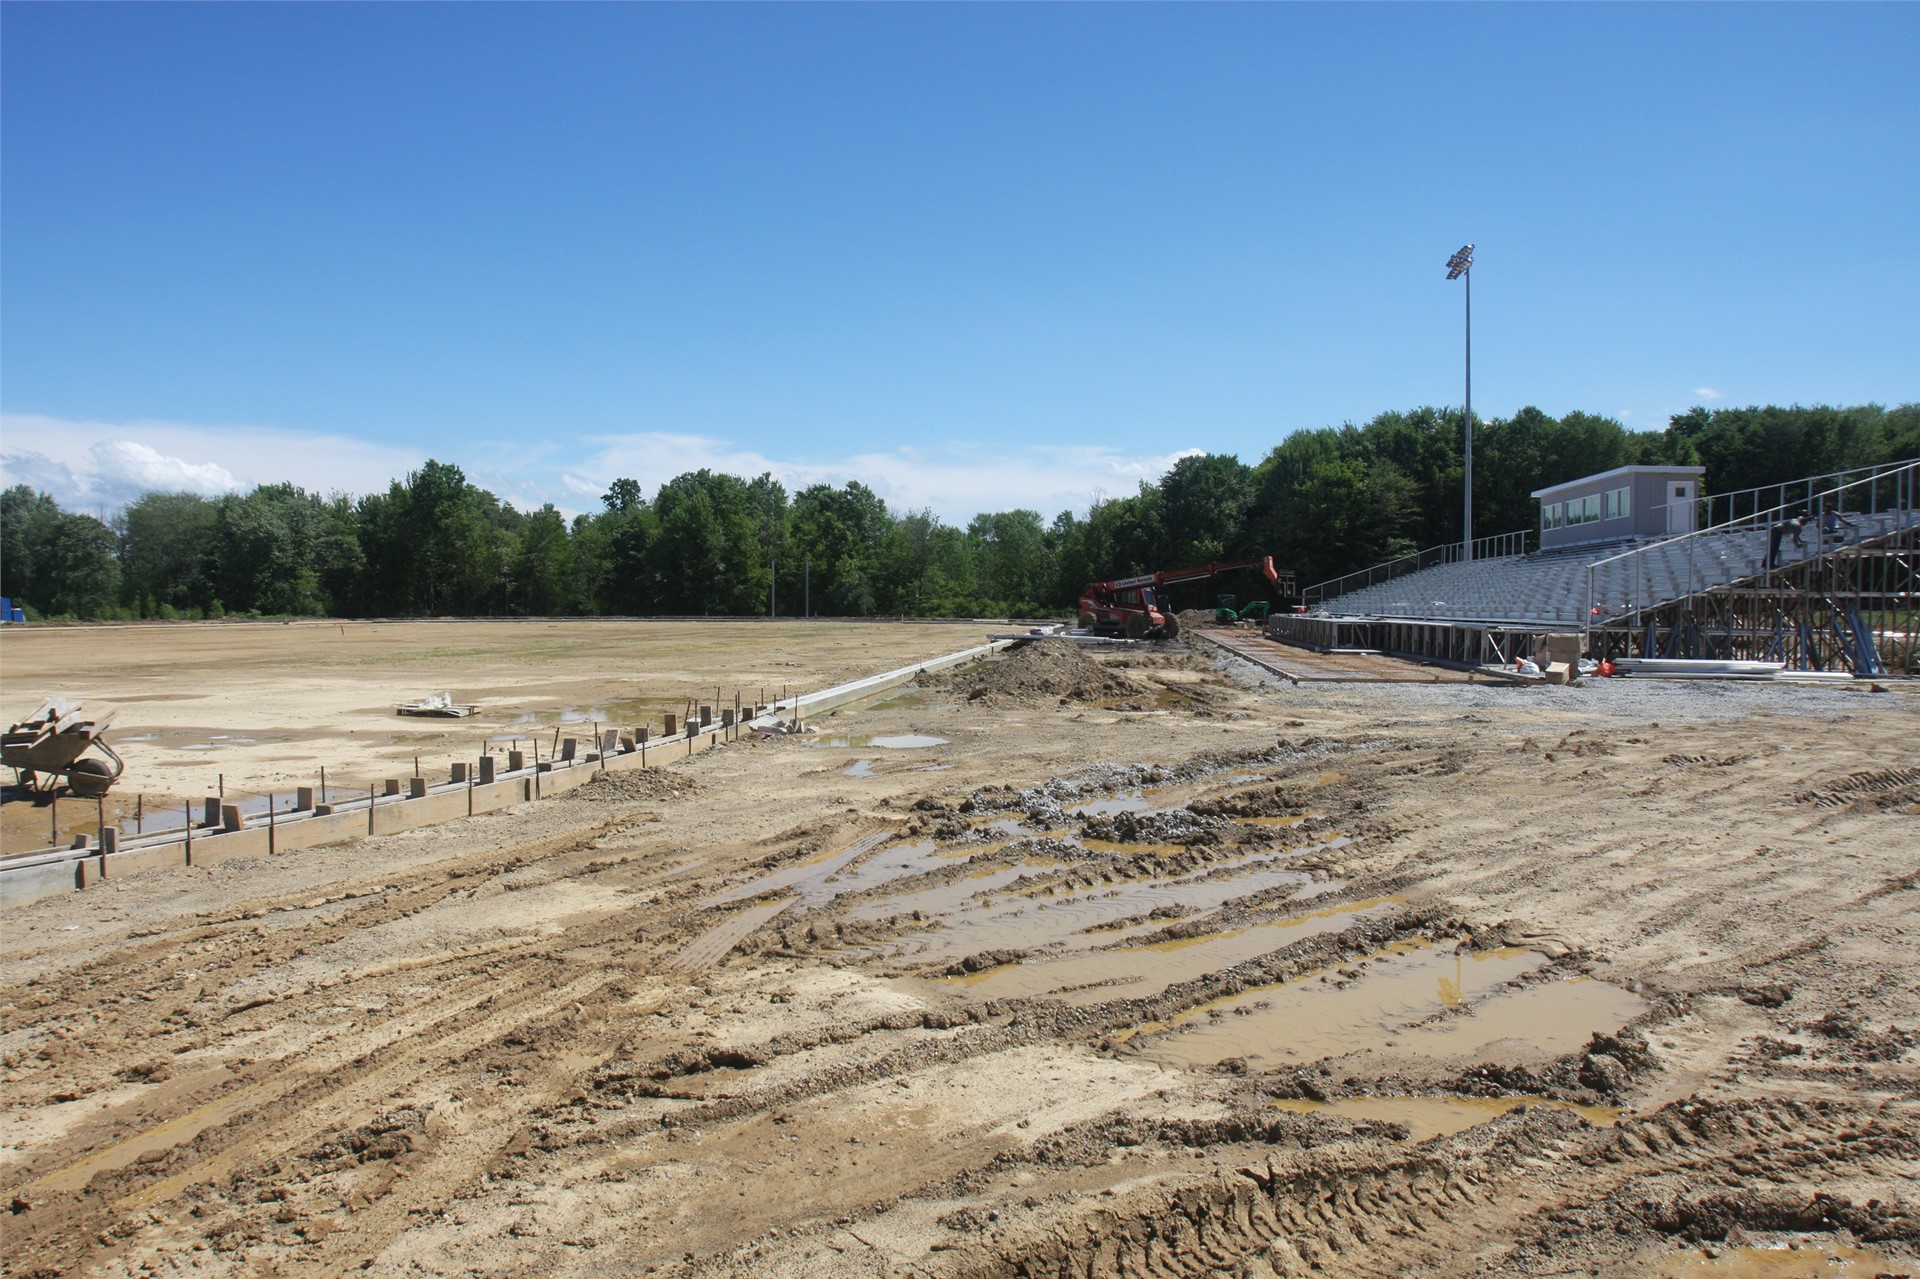 View of home field/home stands from northwest corner of track